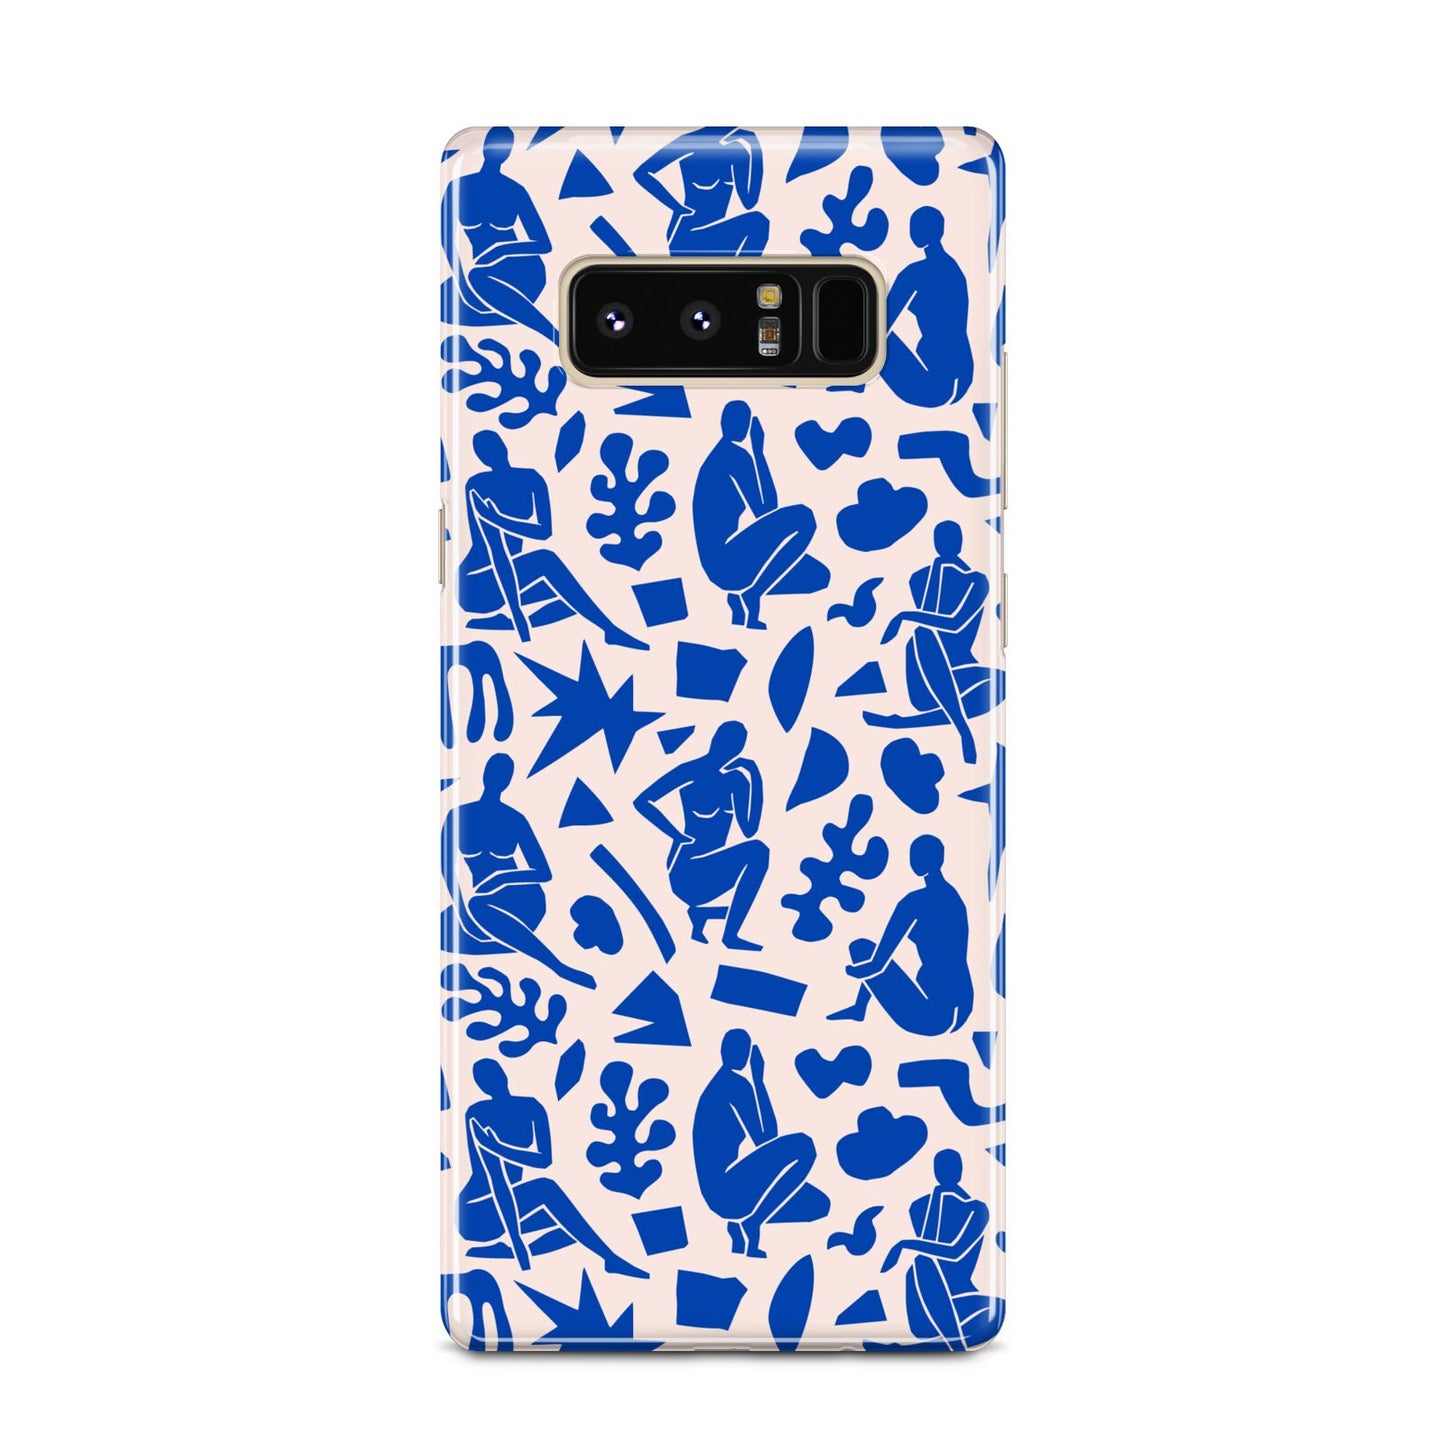 Abstract Art Samsung Galaxy Note 8 Case